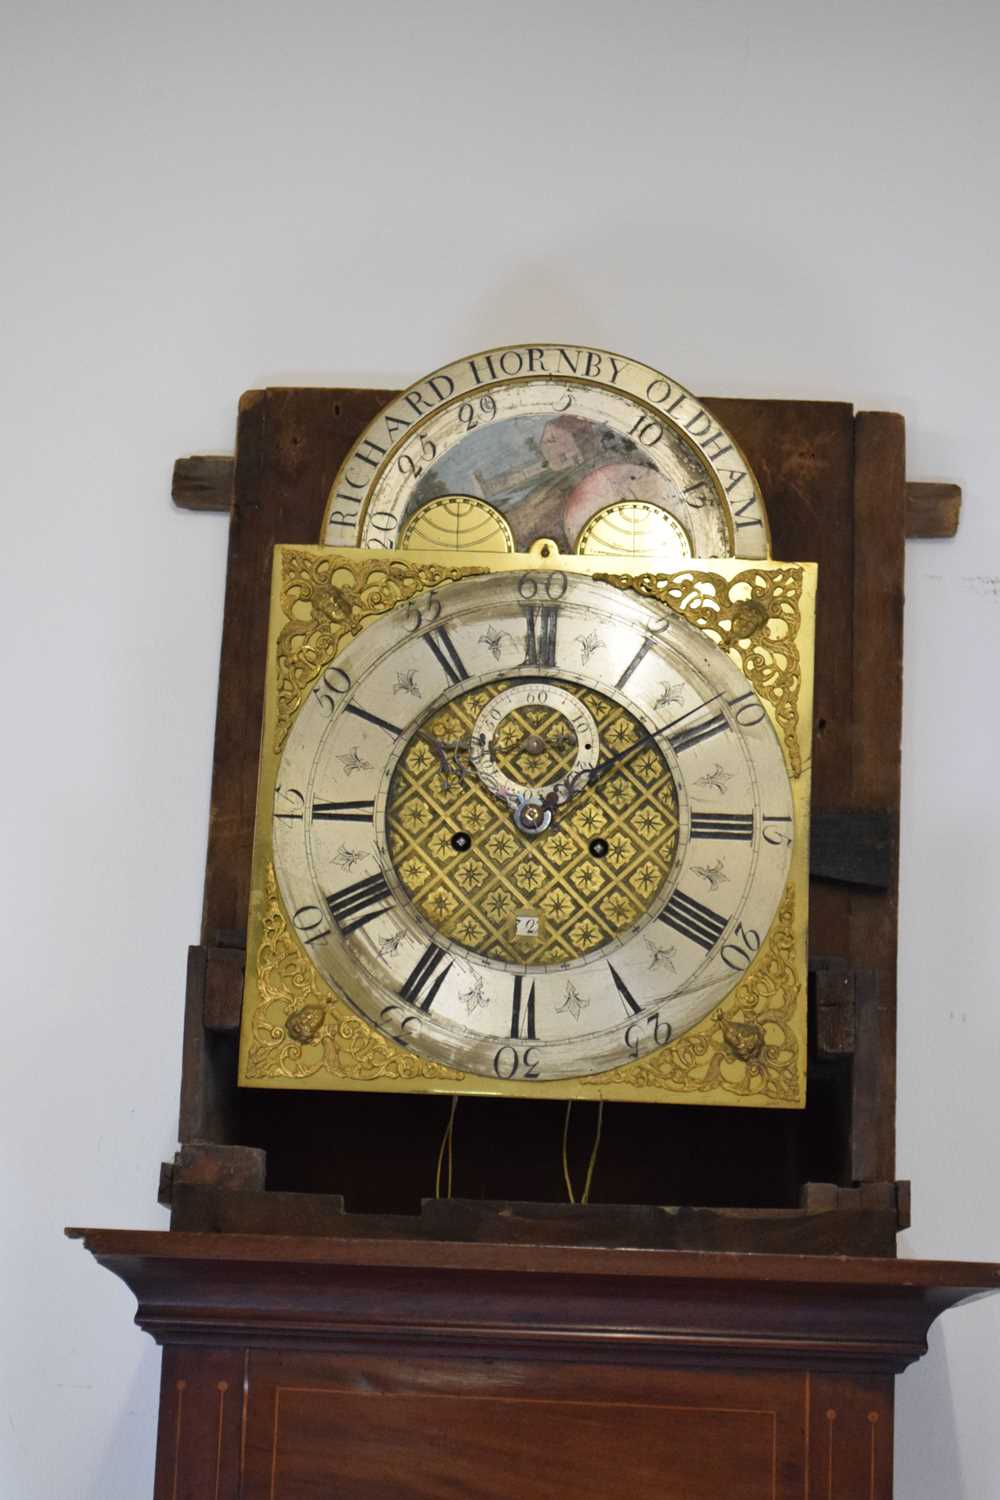 Early 19th Century inlaid mahogany cased 8-day brass dial longcase clock - Richard Hornby, Oldham - Image 13 of 14